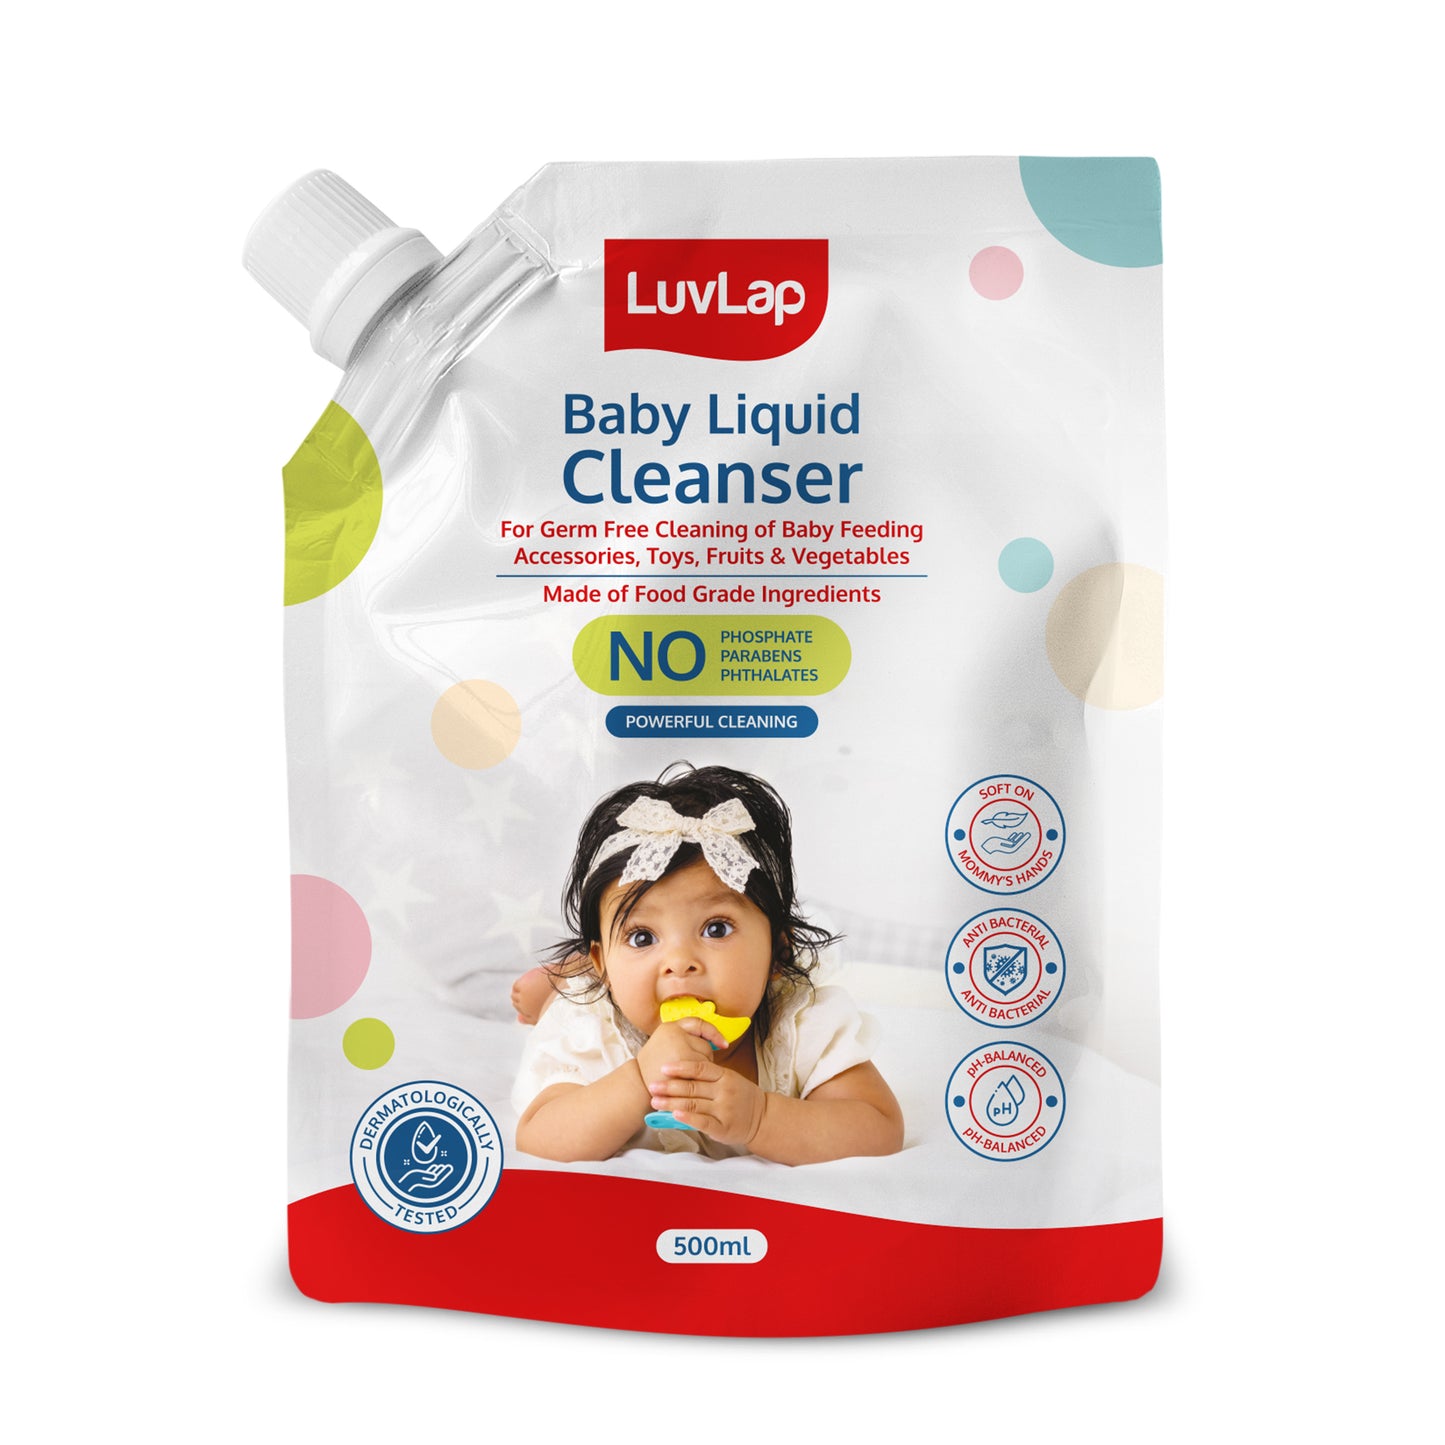 Baby Liquid Cleanser Refill pack- 500ml, For cleaning feeding bottle, cutlery, toys, fruits & vegetables, Kills 99.9% Germs, pH Balanced Dermatologically tested formula, No harsh chemicals